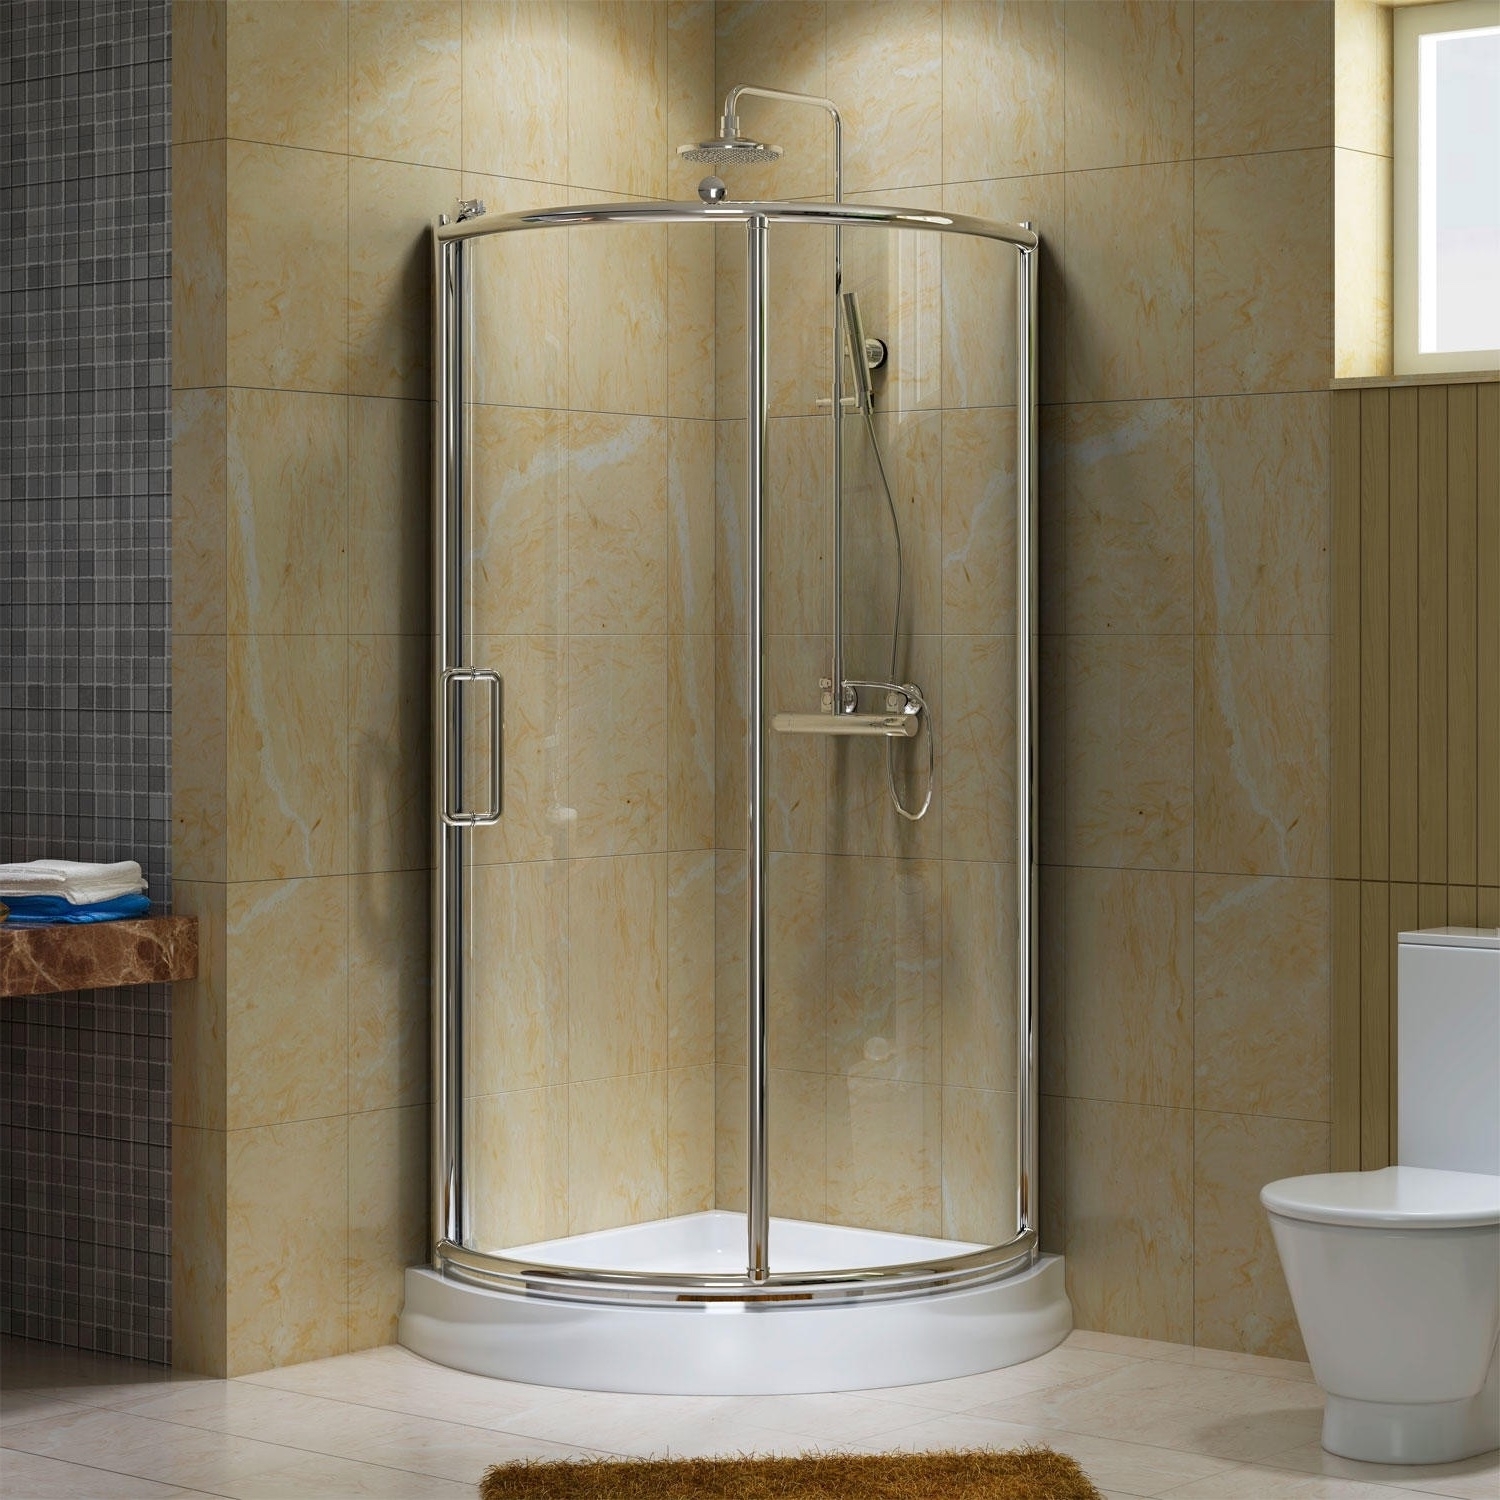 50 Corner Shower For Small Bathroom You Ll Love In 2020 Visual Hunt,Furnishing A New Home